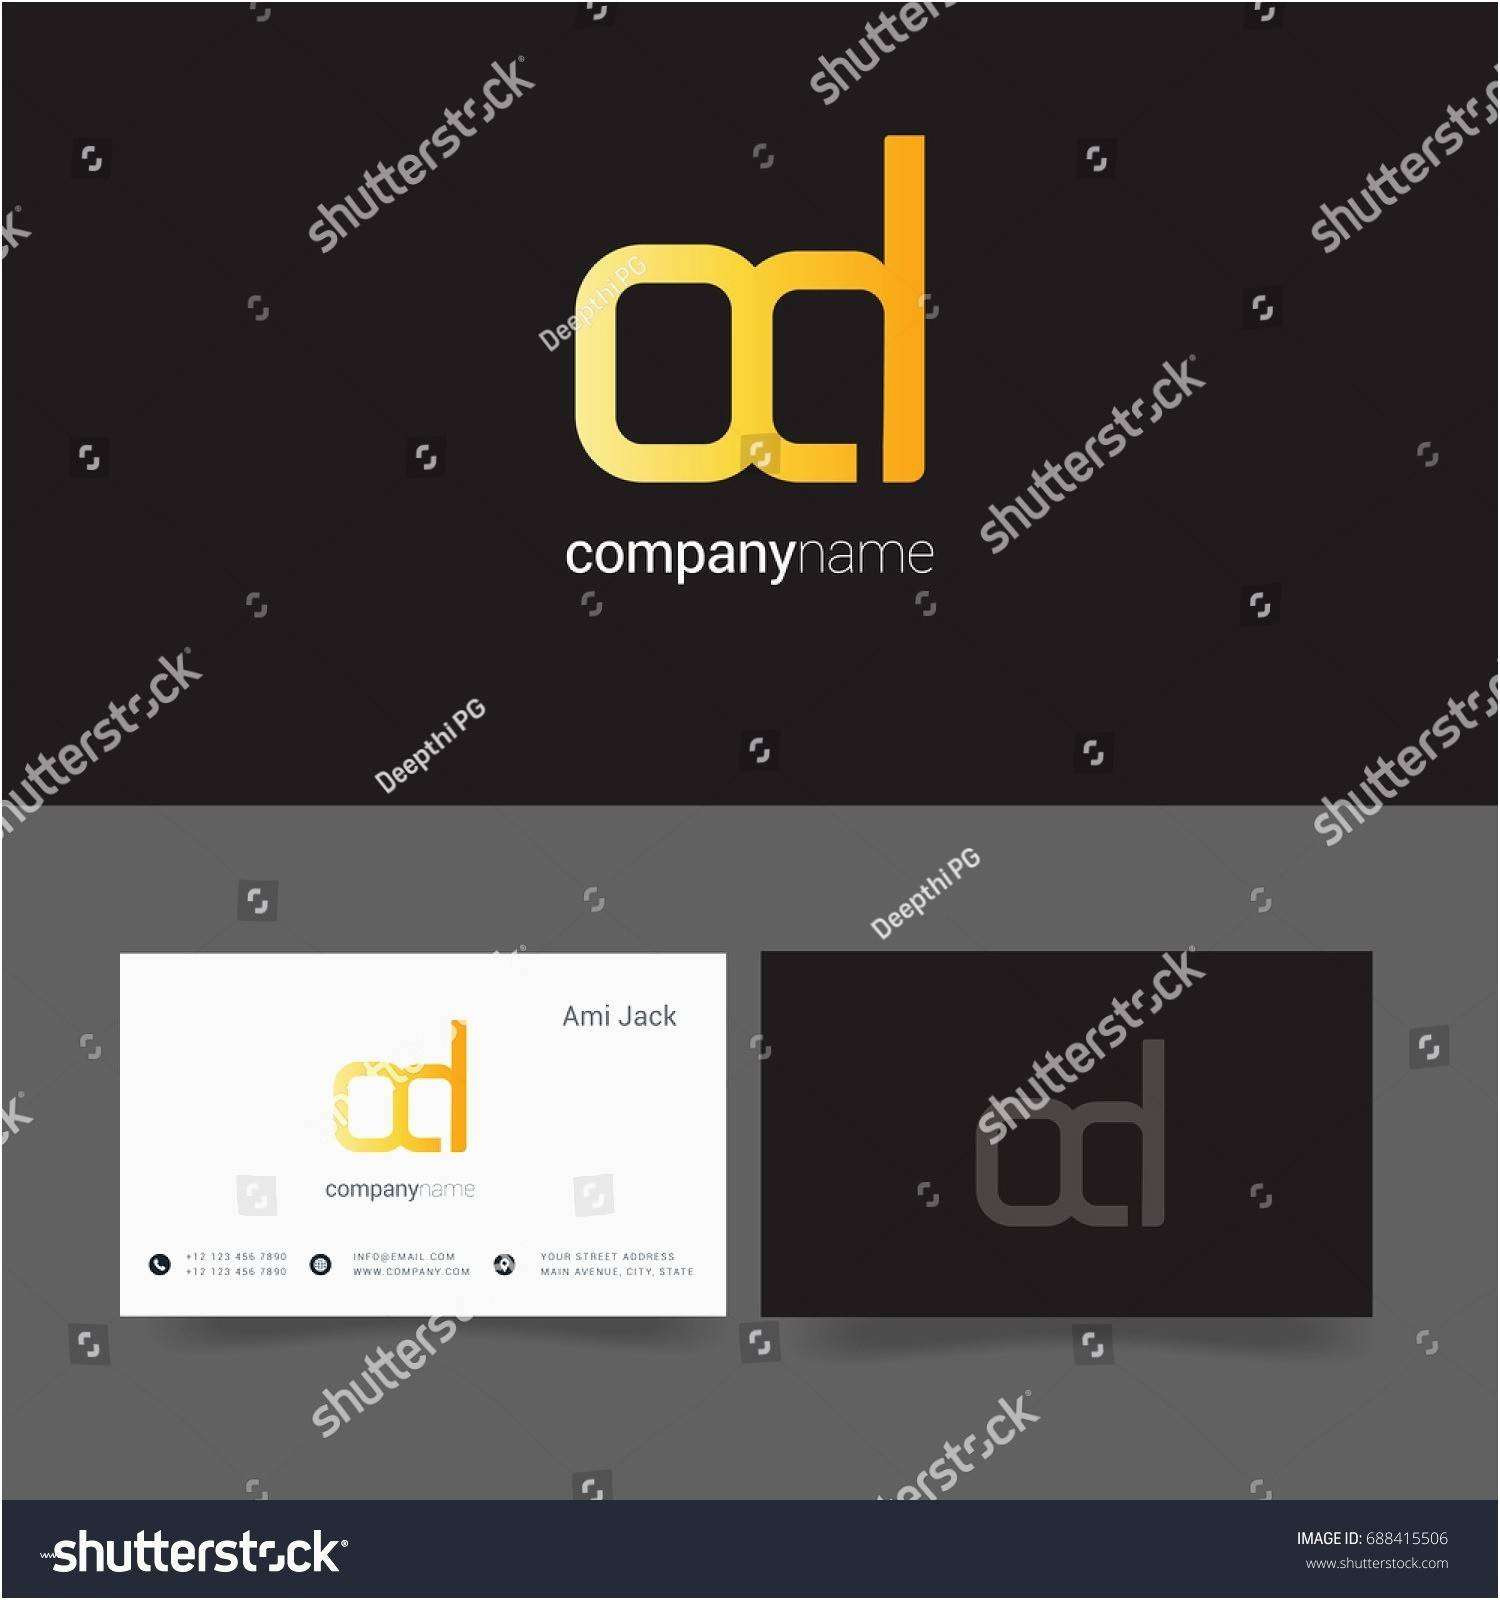 online business card template unique awesome gallery free business card template in 2019 business cards of online business card template